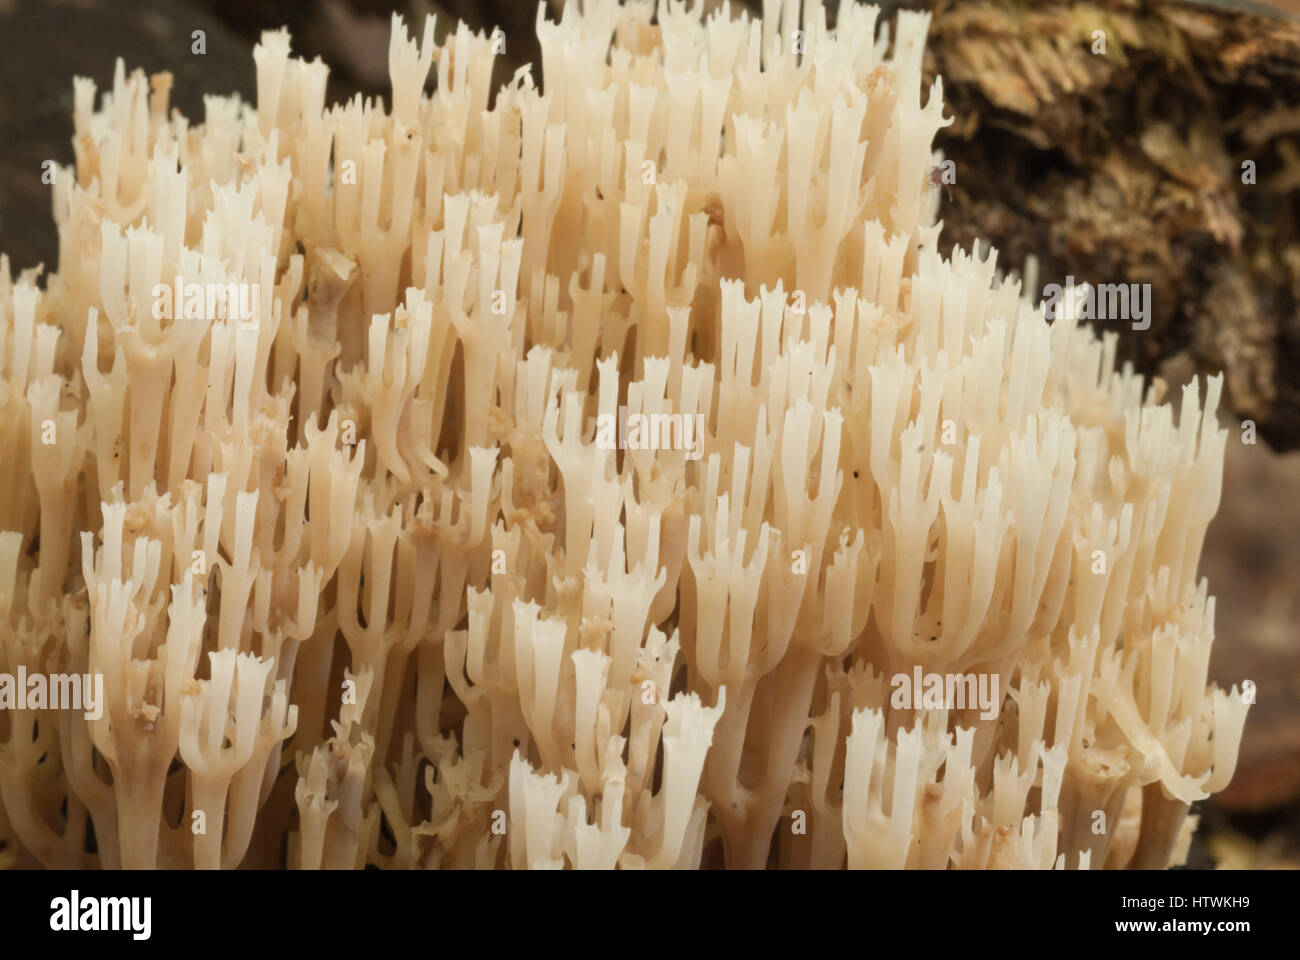 Crown coral fungus growing on decaying wood in Charleston Lake Provincial Park, Ontario, Canada. Stock Photo